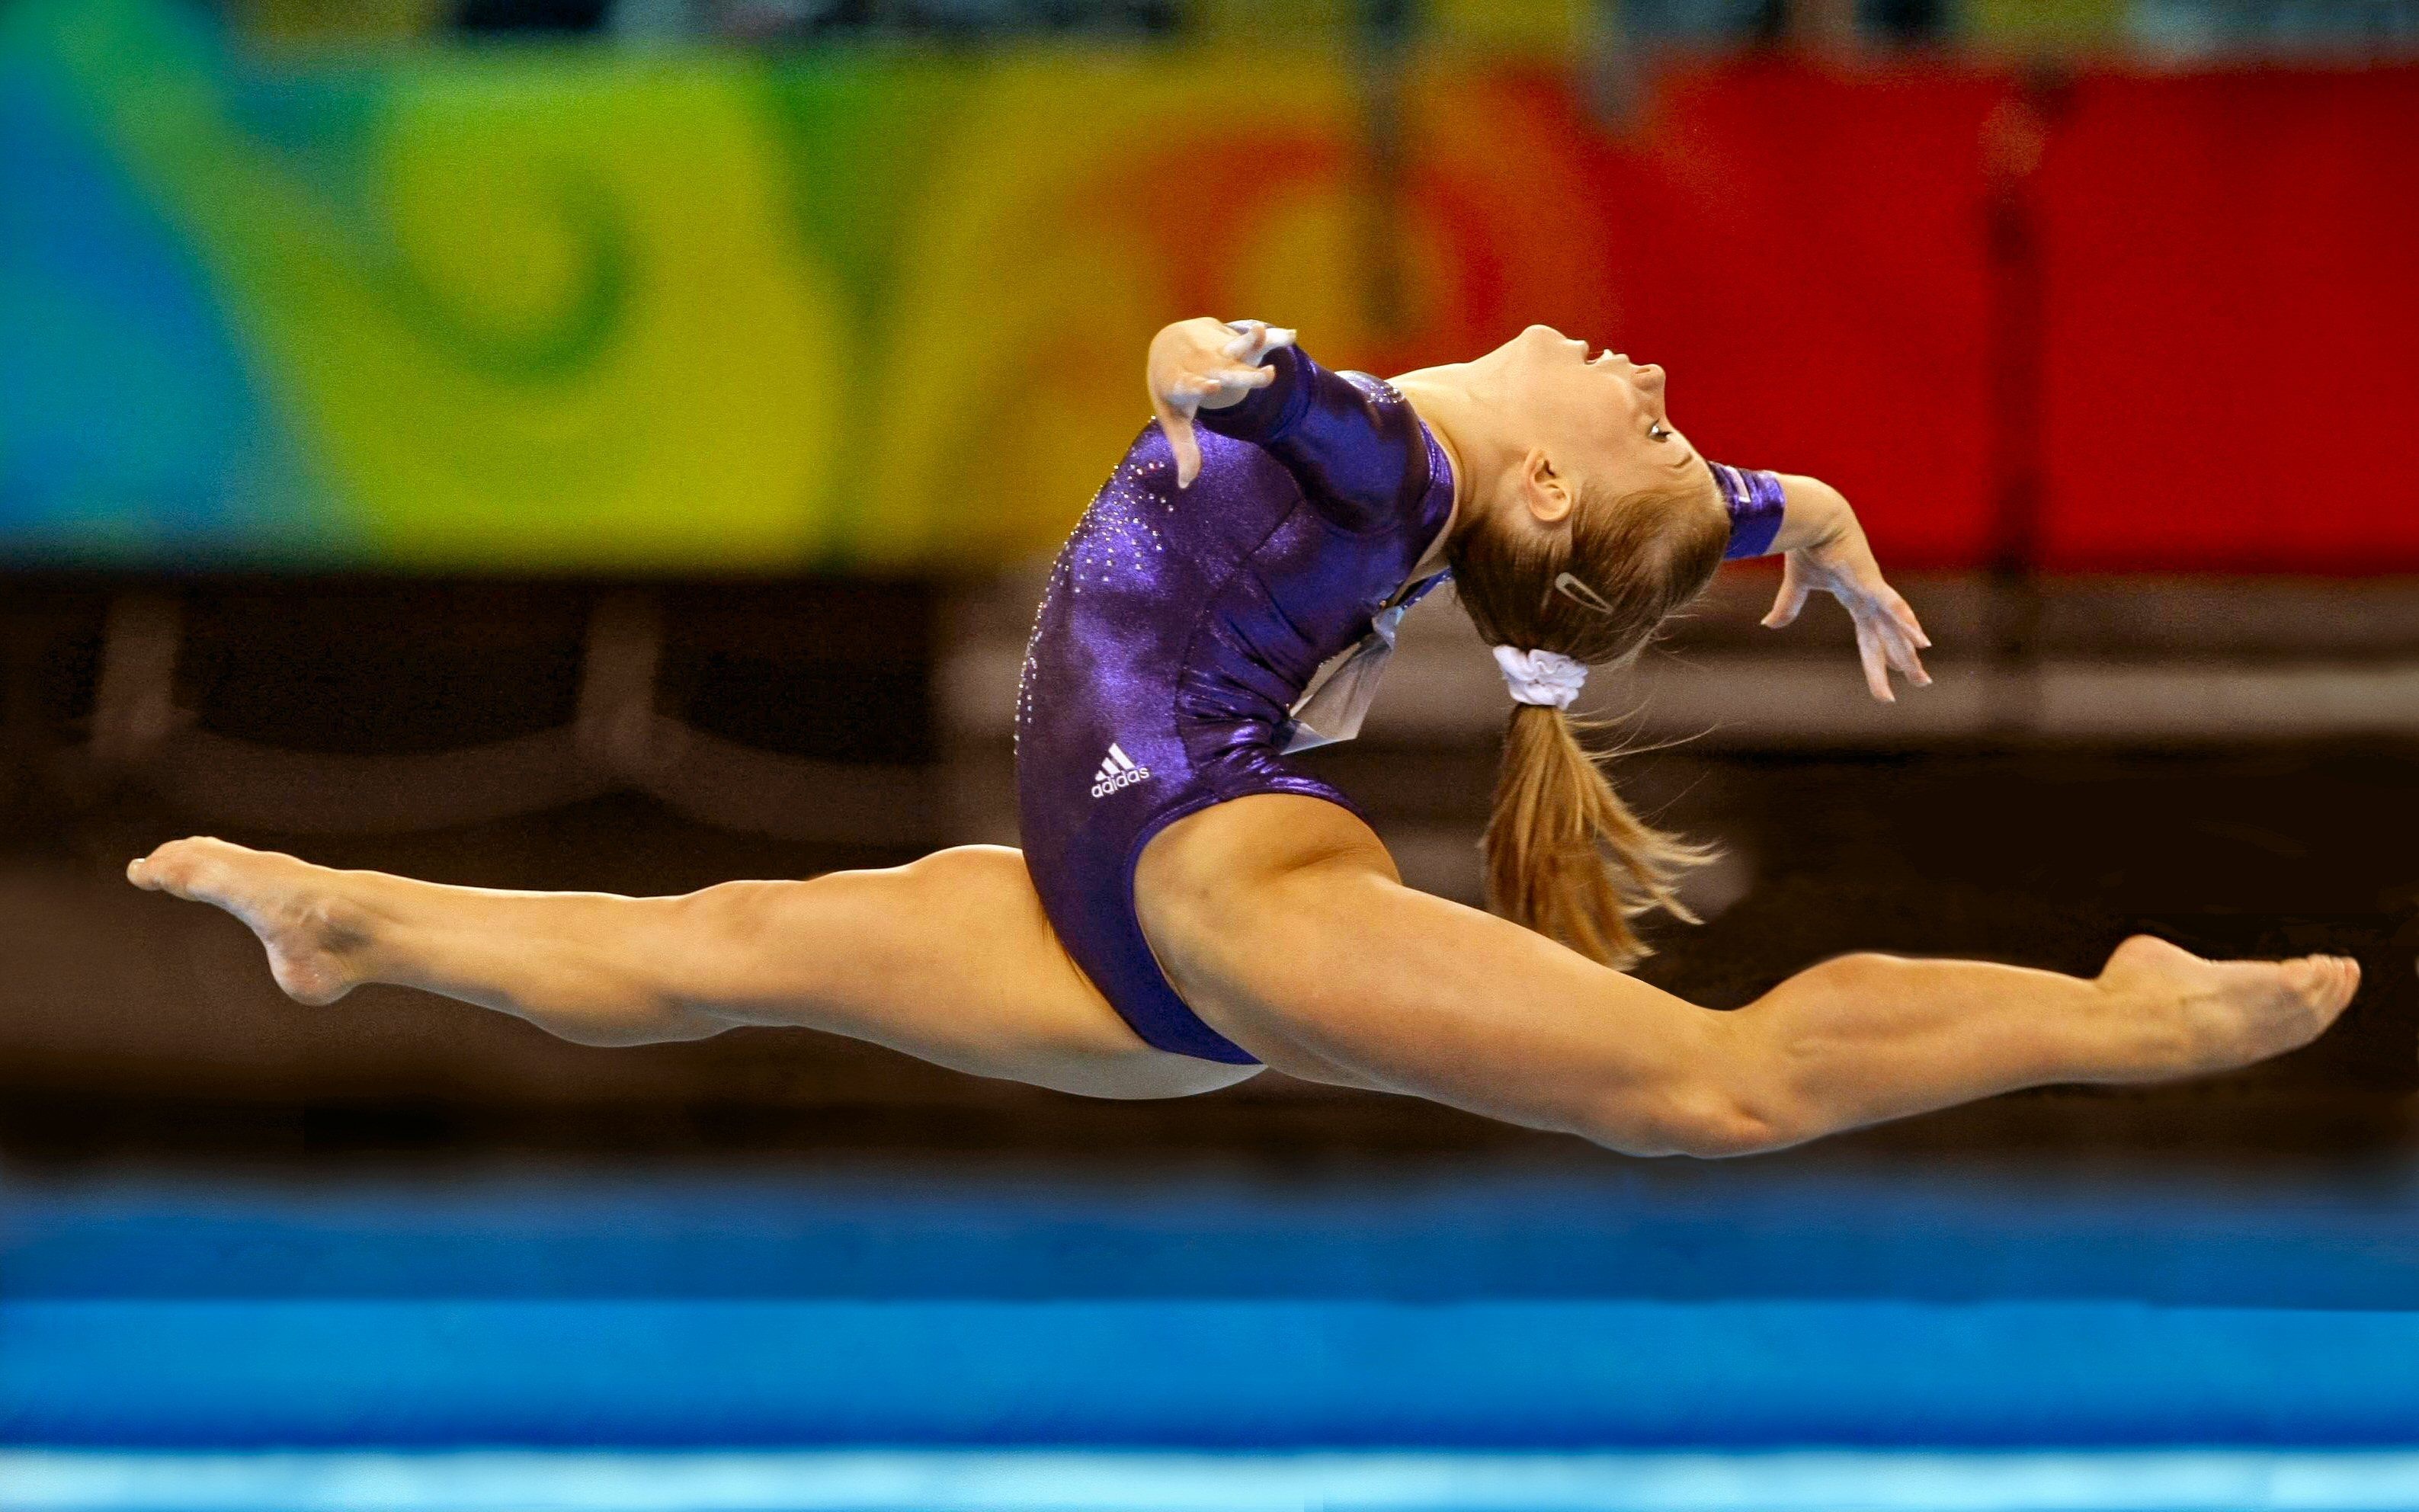 Acrobatic Gymnastics: A stretch during a jump performed by a professional floor gymnast. 3180x1990 HD Background.